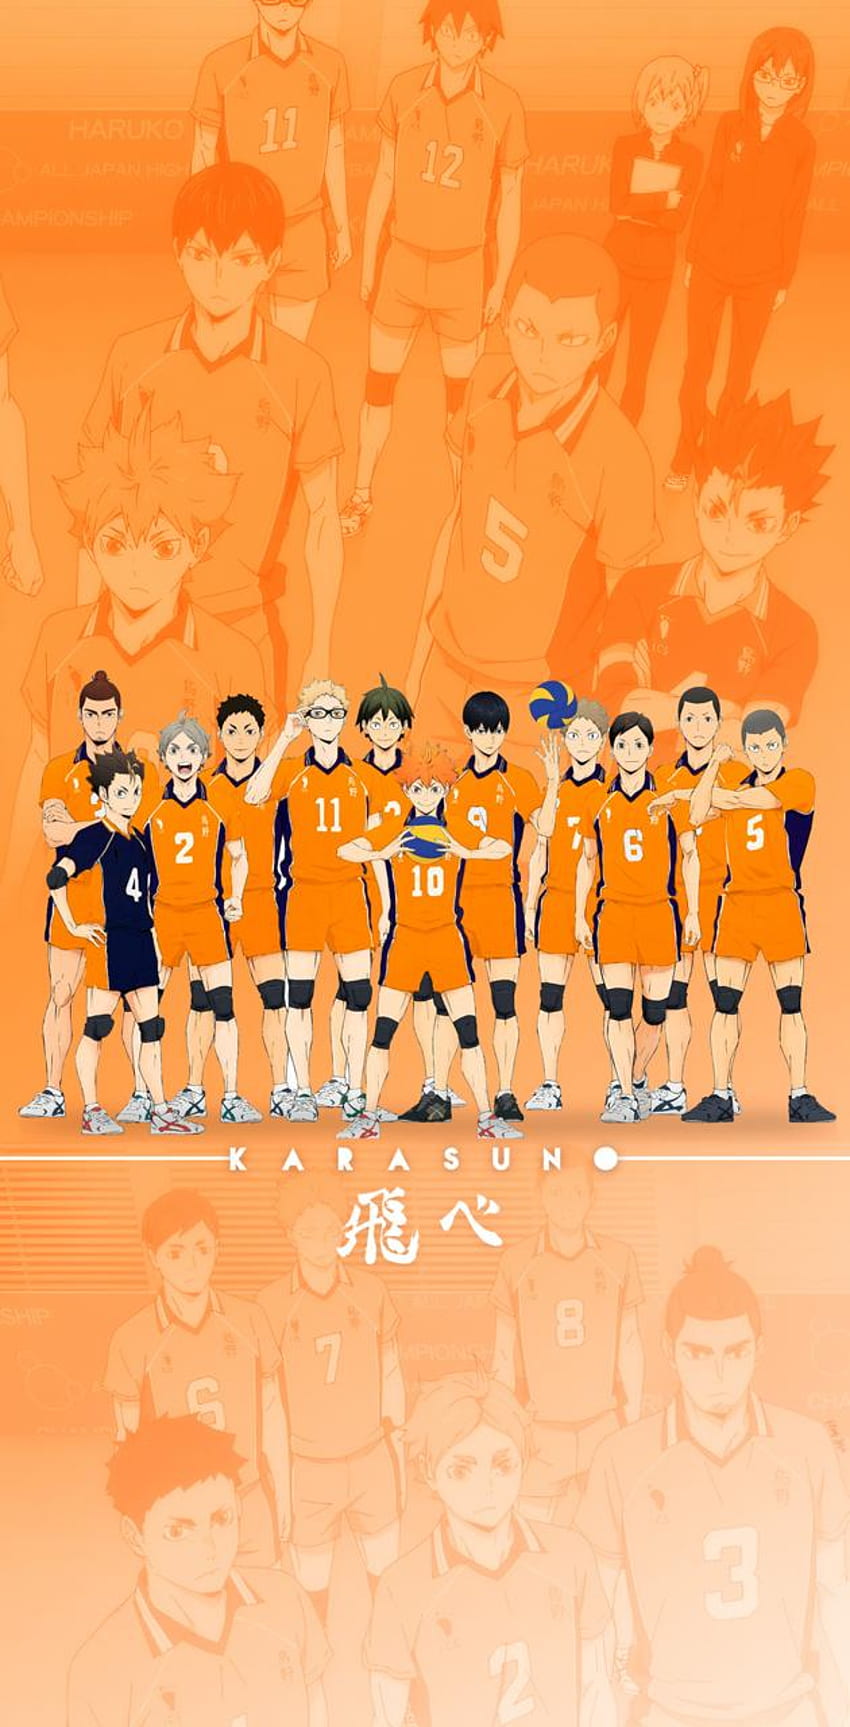 TIANDOU Haikyuu Wallpaper PC 4k Poster Decorative Painting Canvas Wall Art  Living Room Poster Bedroom Painting 24 x 36 Inch 60 x 90 cm  Amazonde  Home  Kitchen